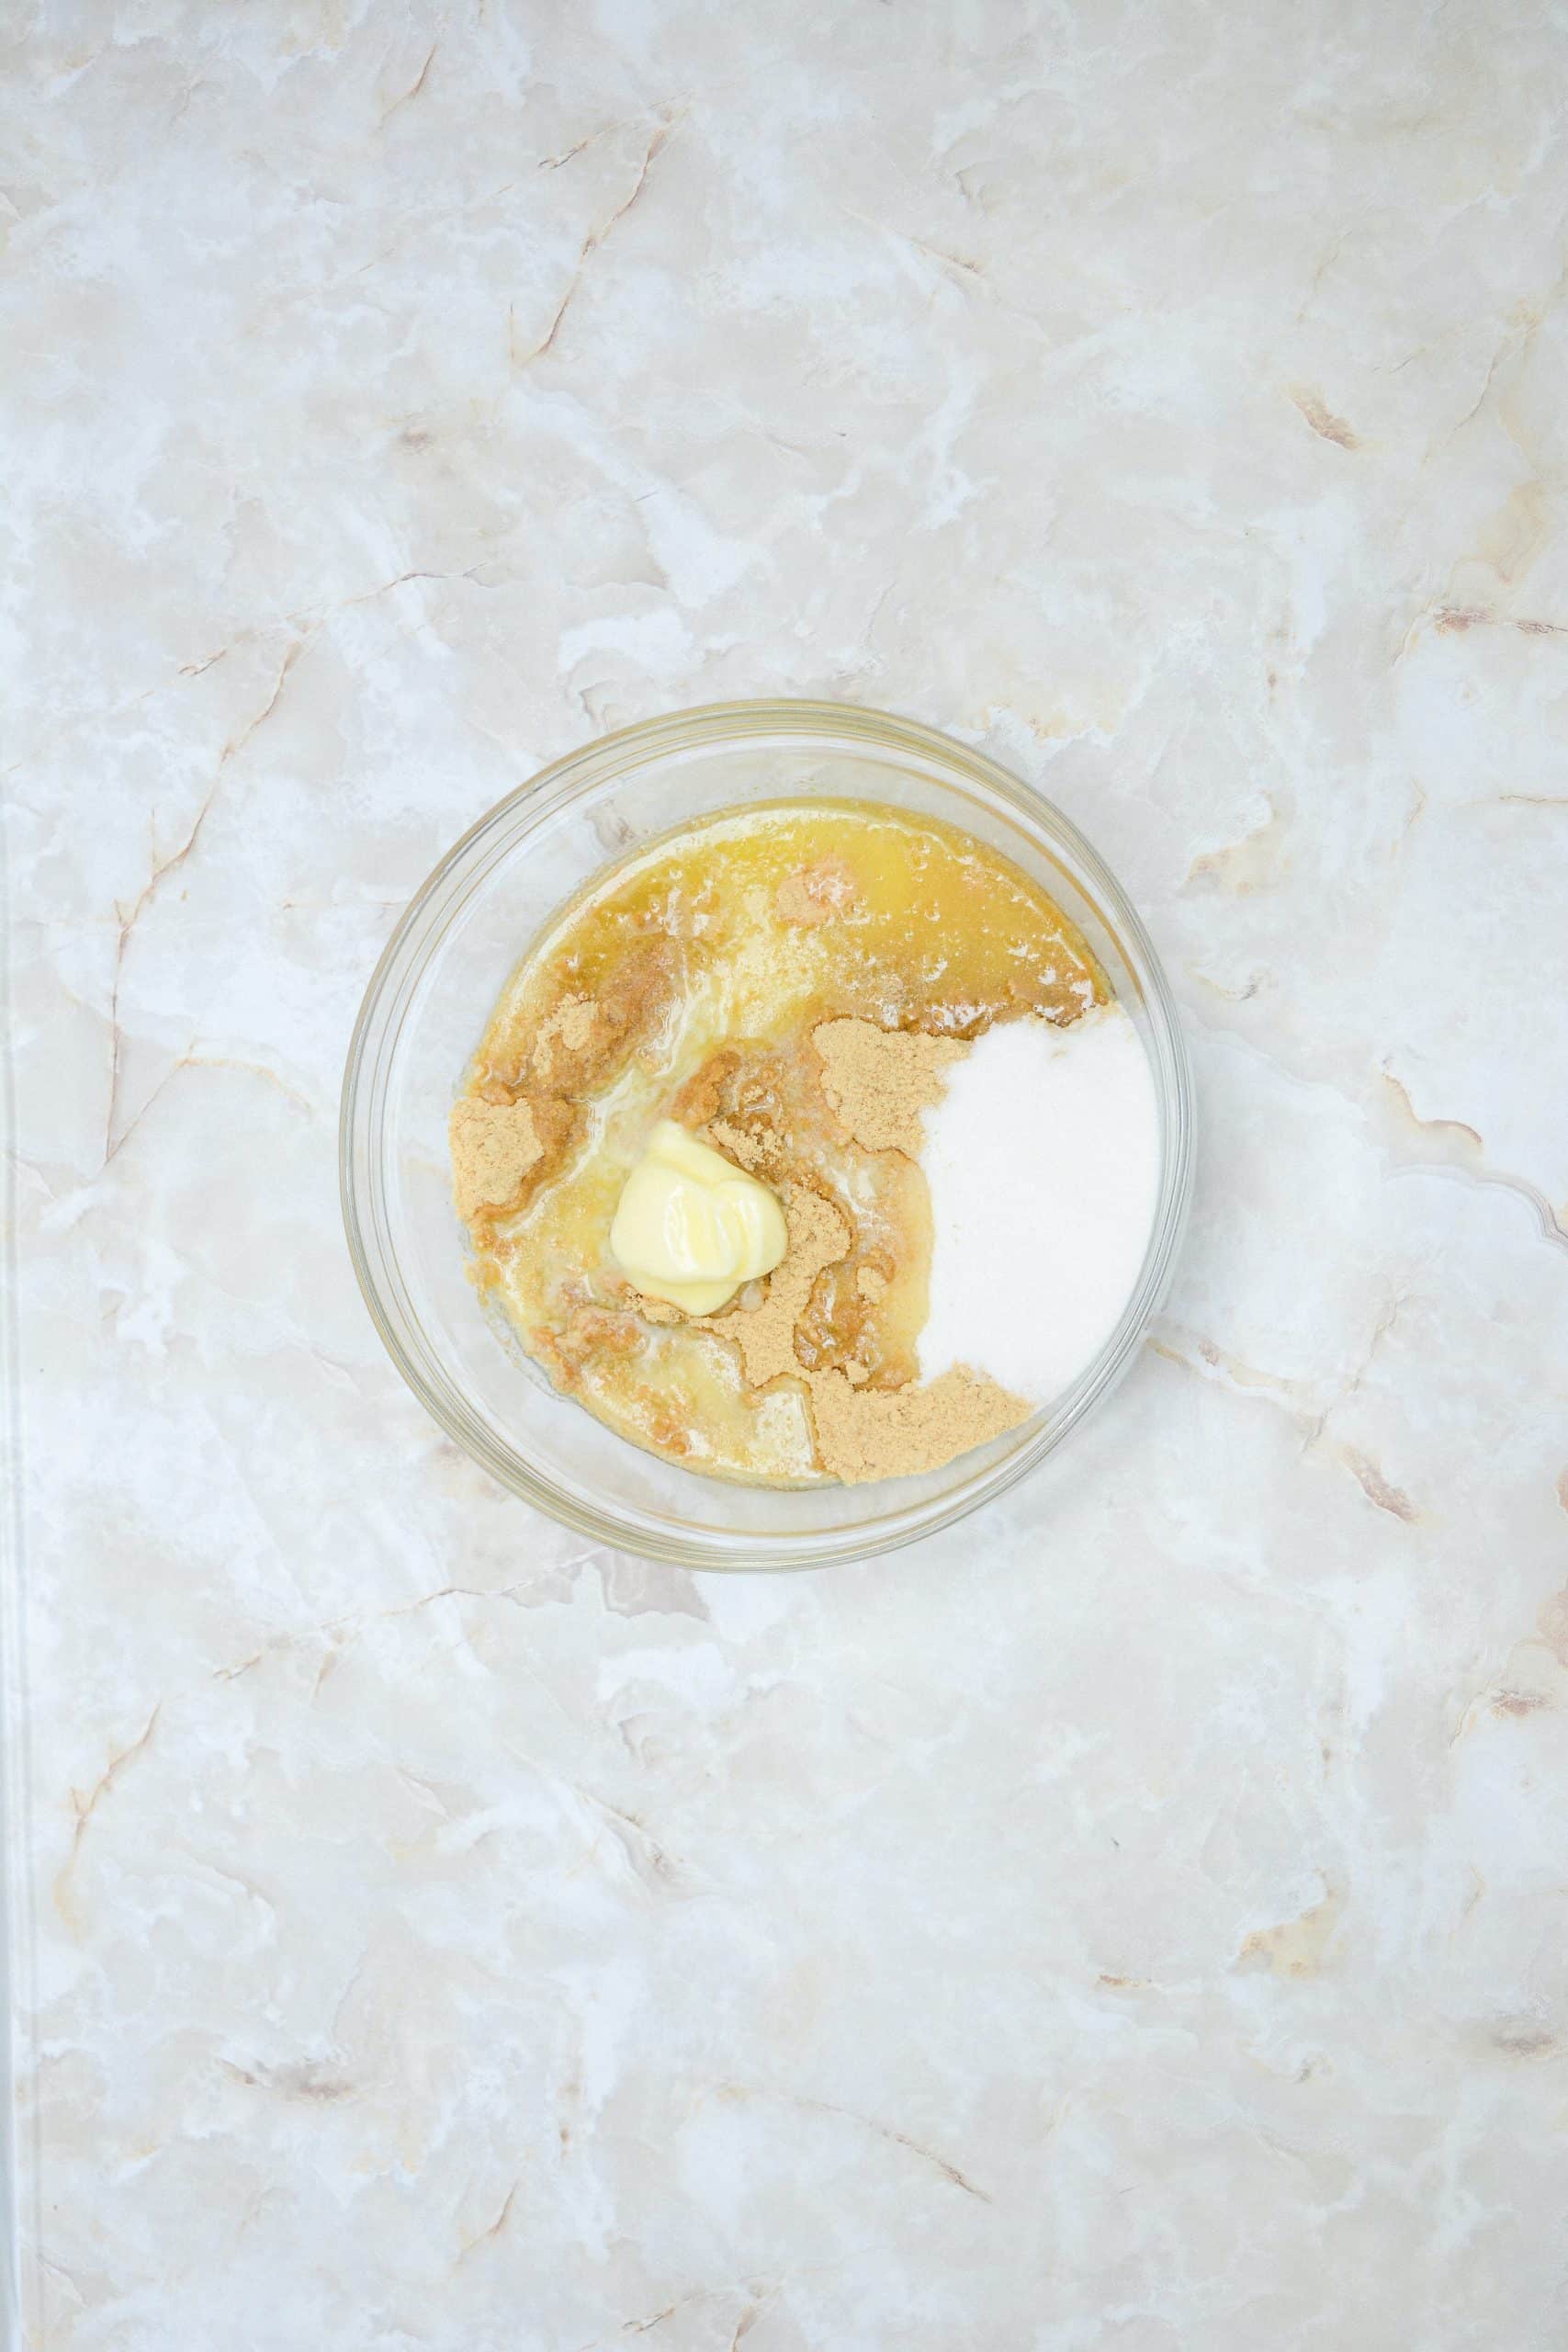 graham cracker crumbs and melted butter in a glass mixing bowl